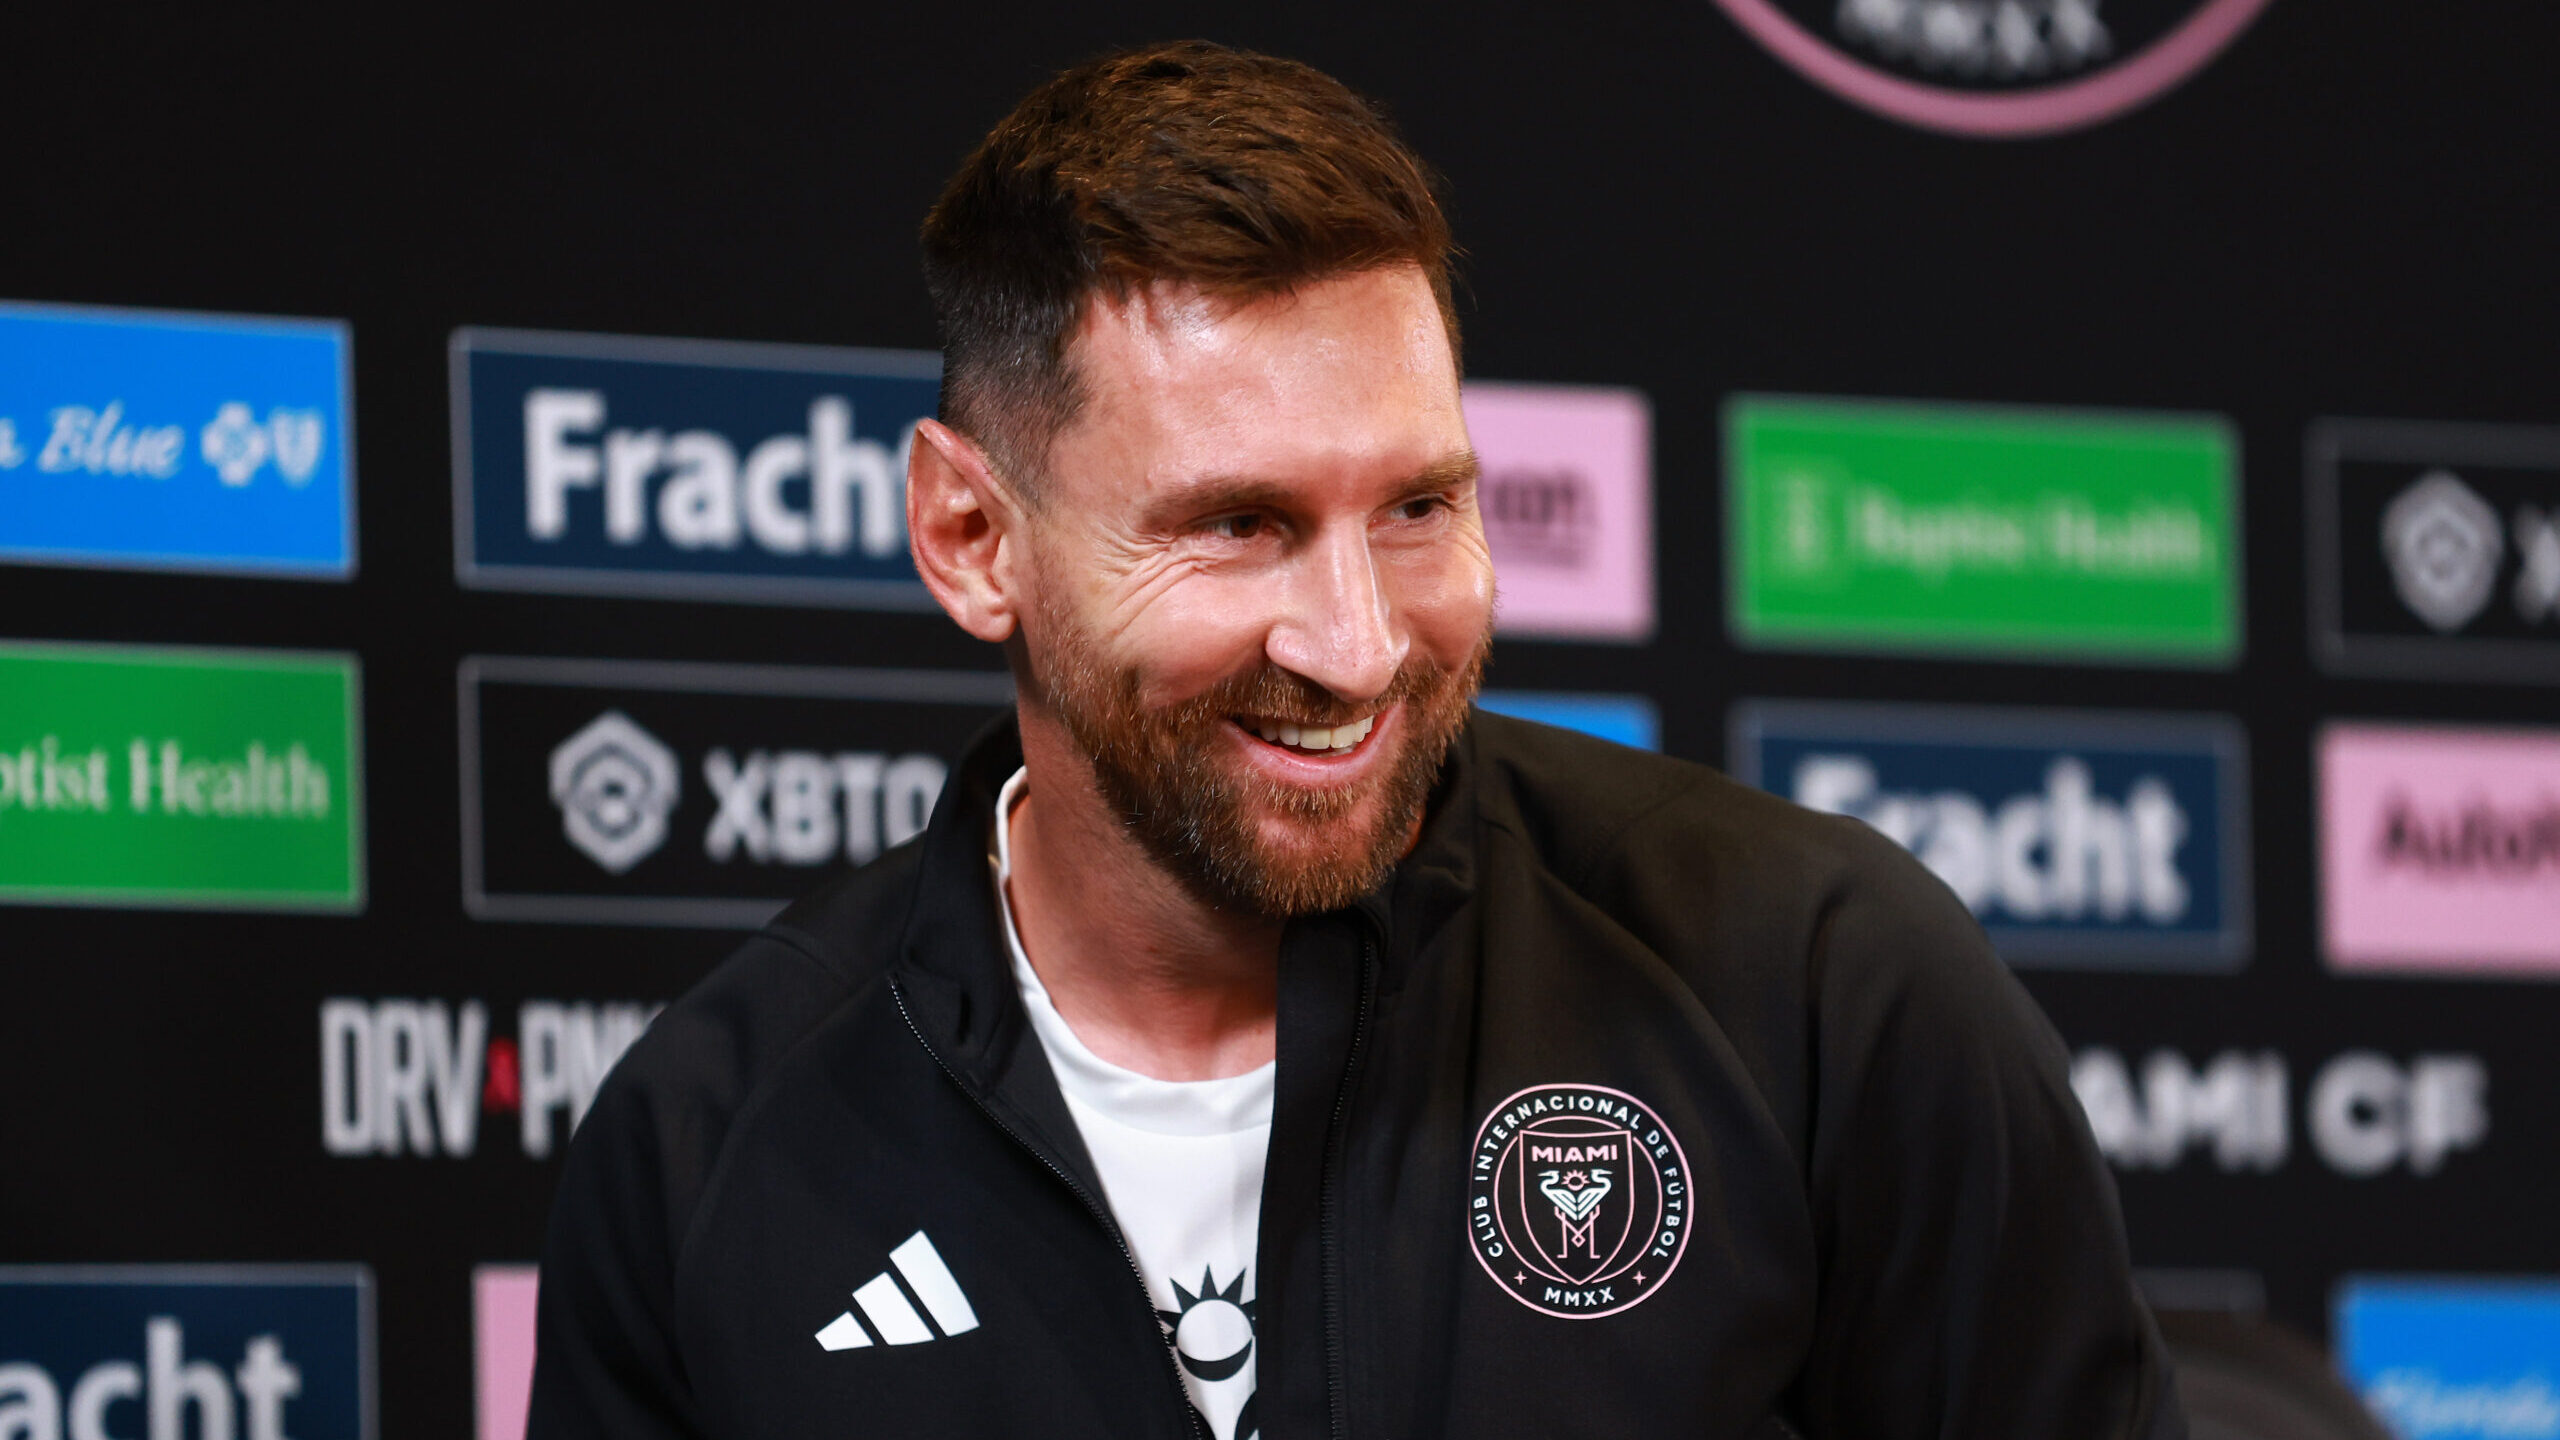 Messi Speaks For 1st Time Since Joining Miami, Says He's Happy With His Choice